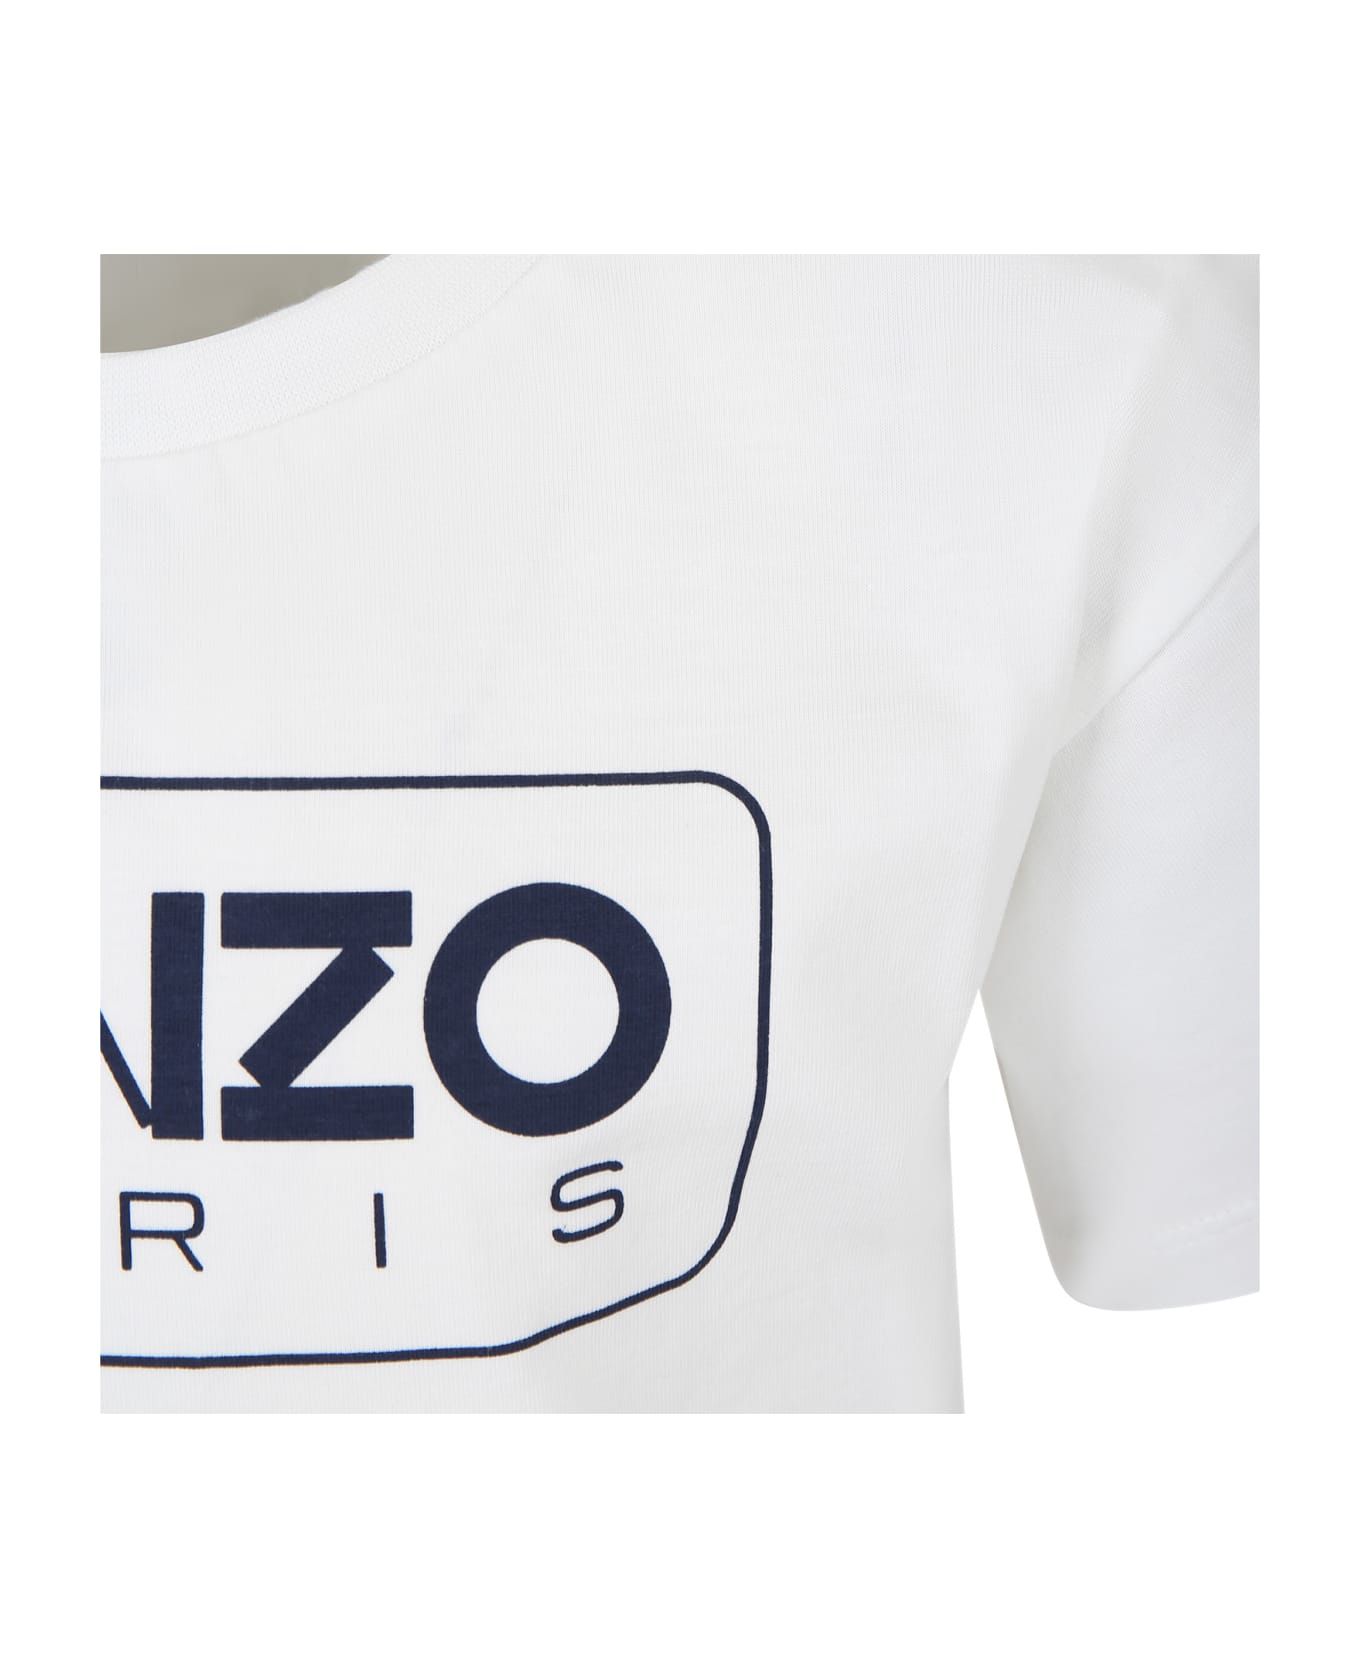 Kenzo Kids Ivory T-shirt For Kids With Logo - Avorio Tシャツ＆ポロシャツ